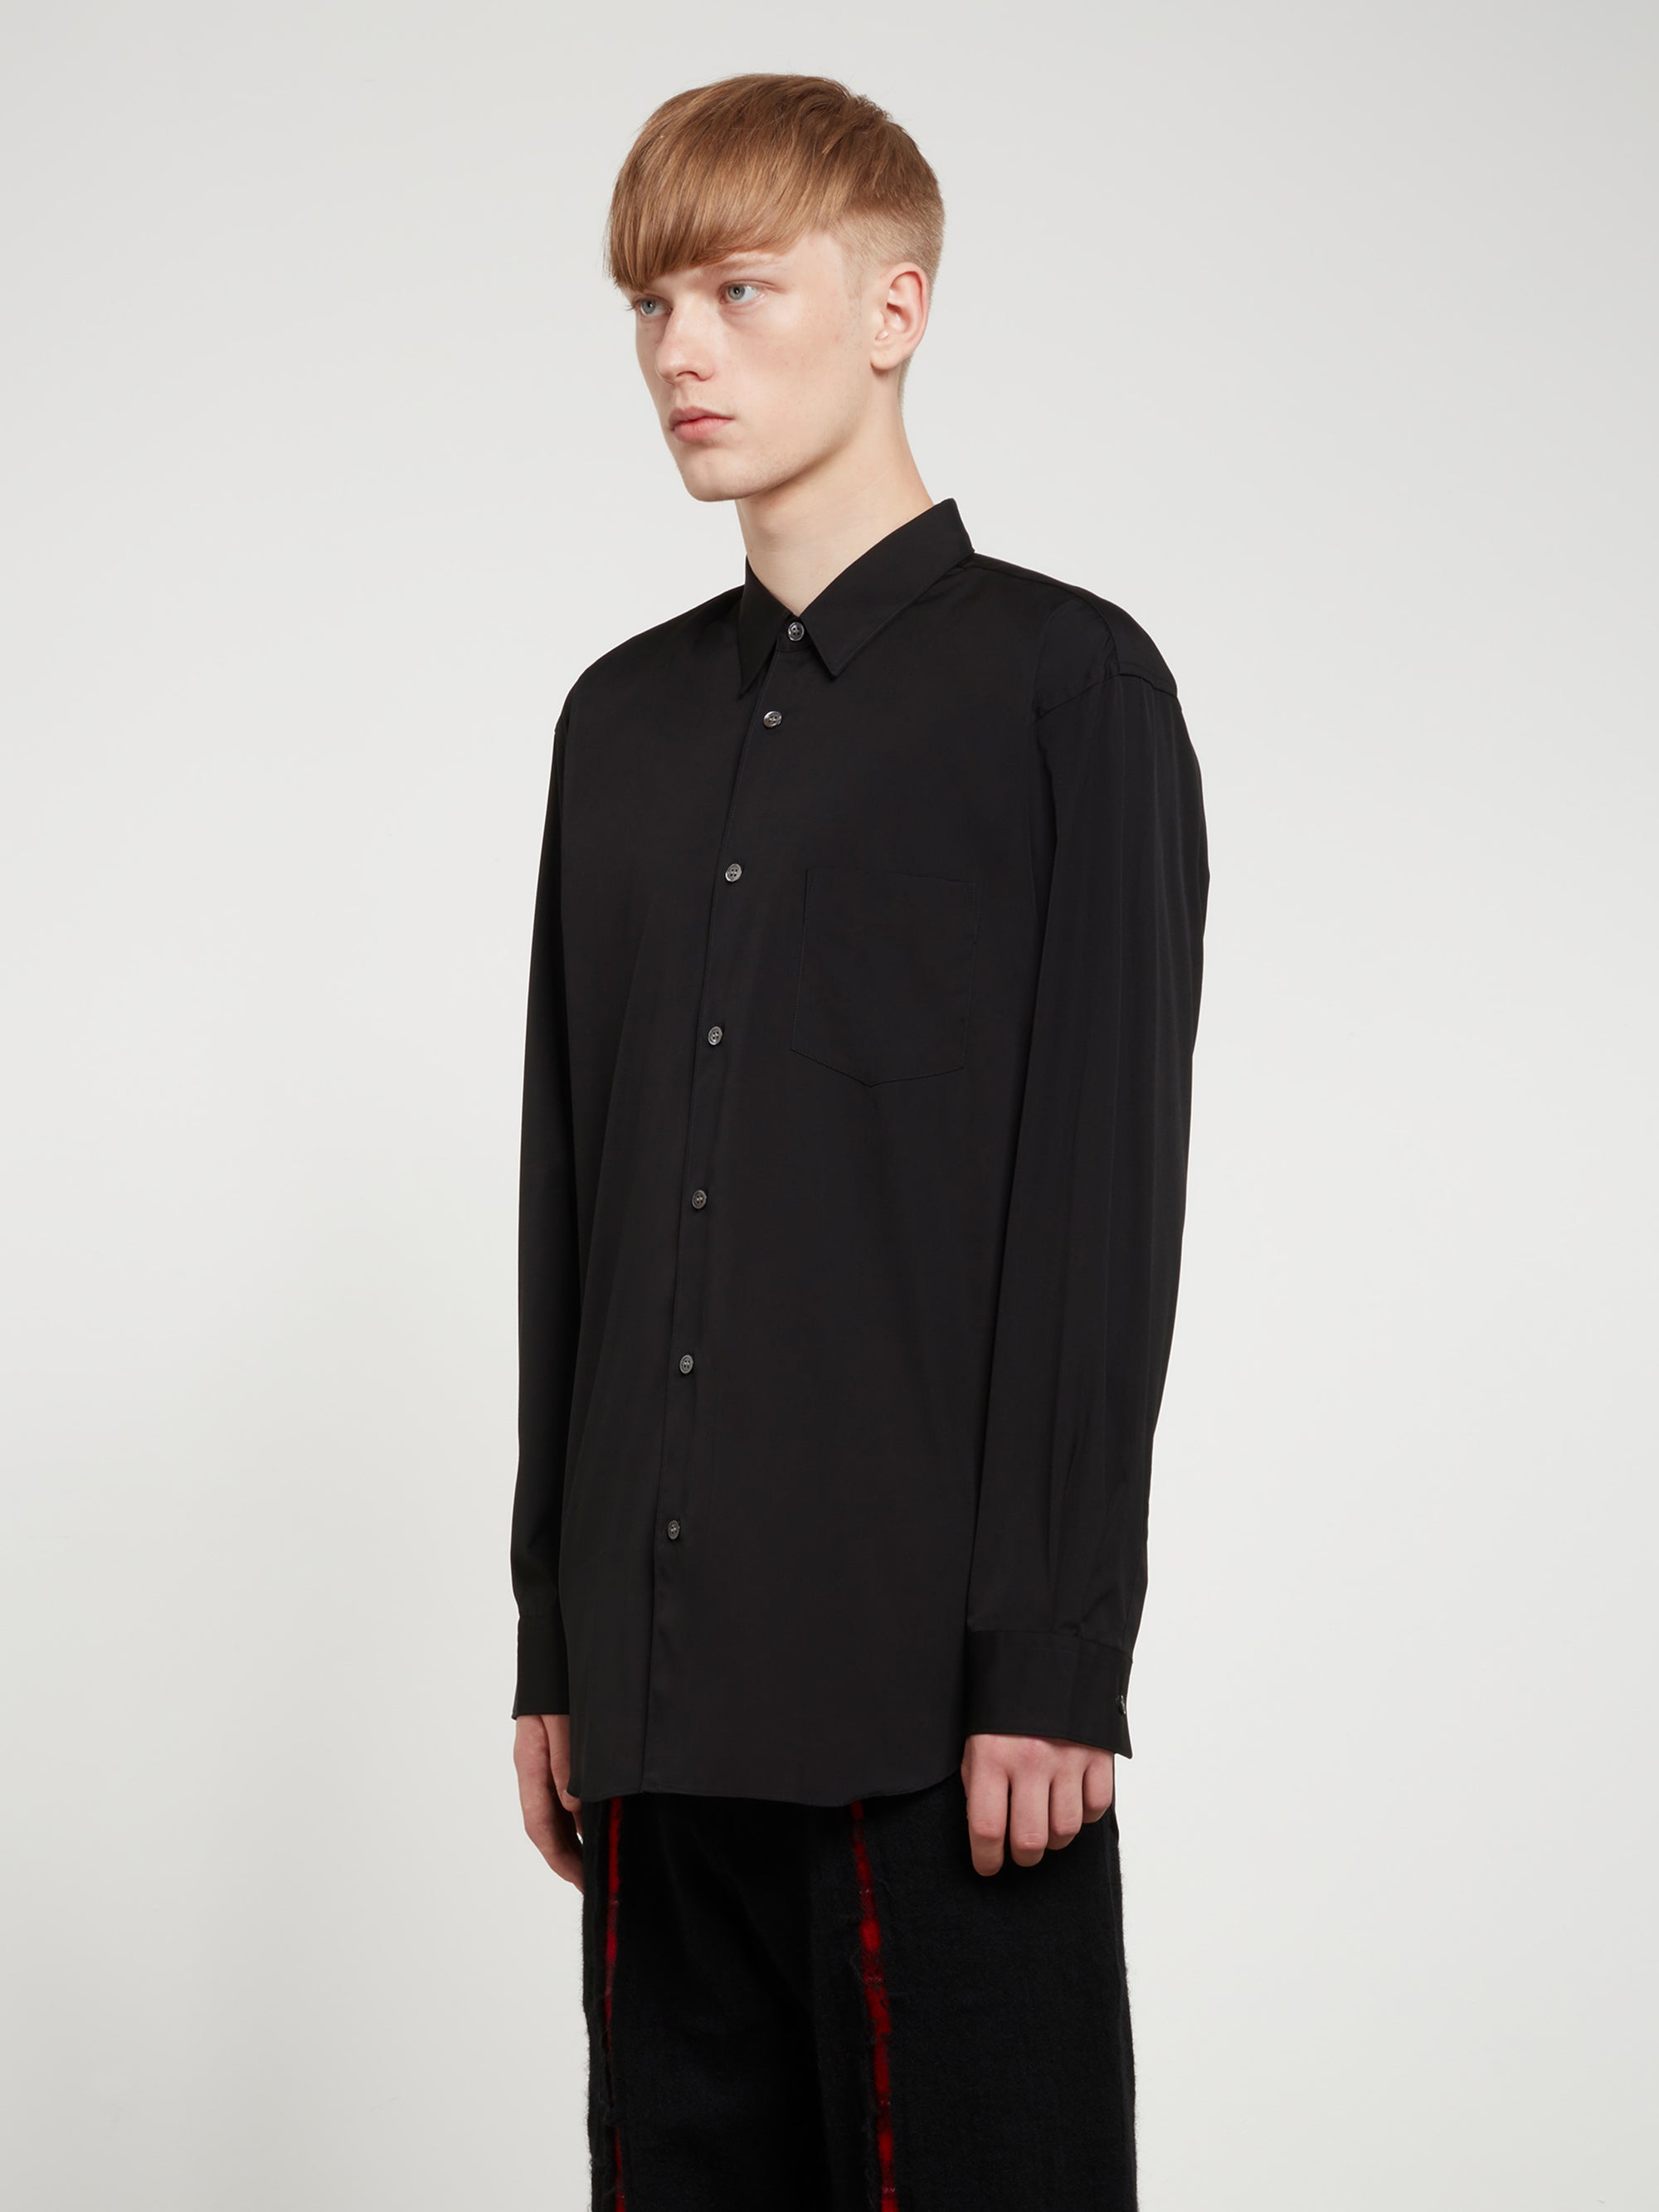 CDG Shirt Forever - Classic Fit Woven Cotton Shirt - (Black) view 3